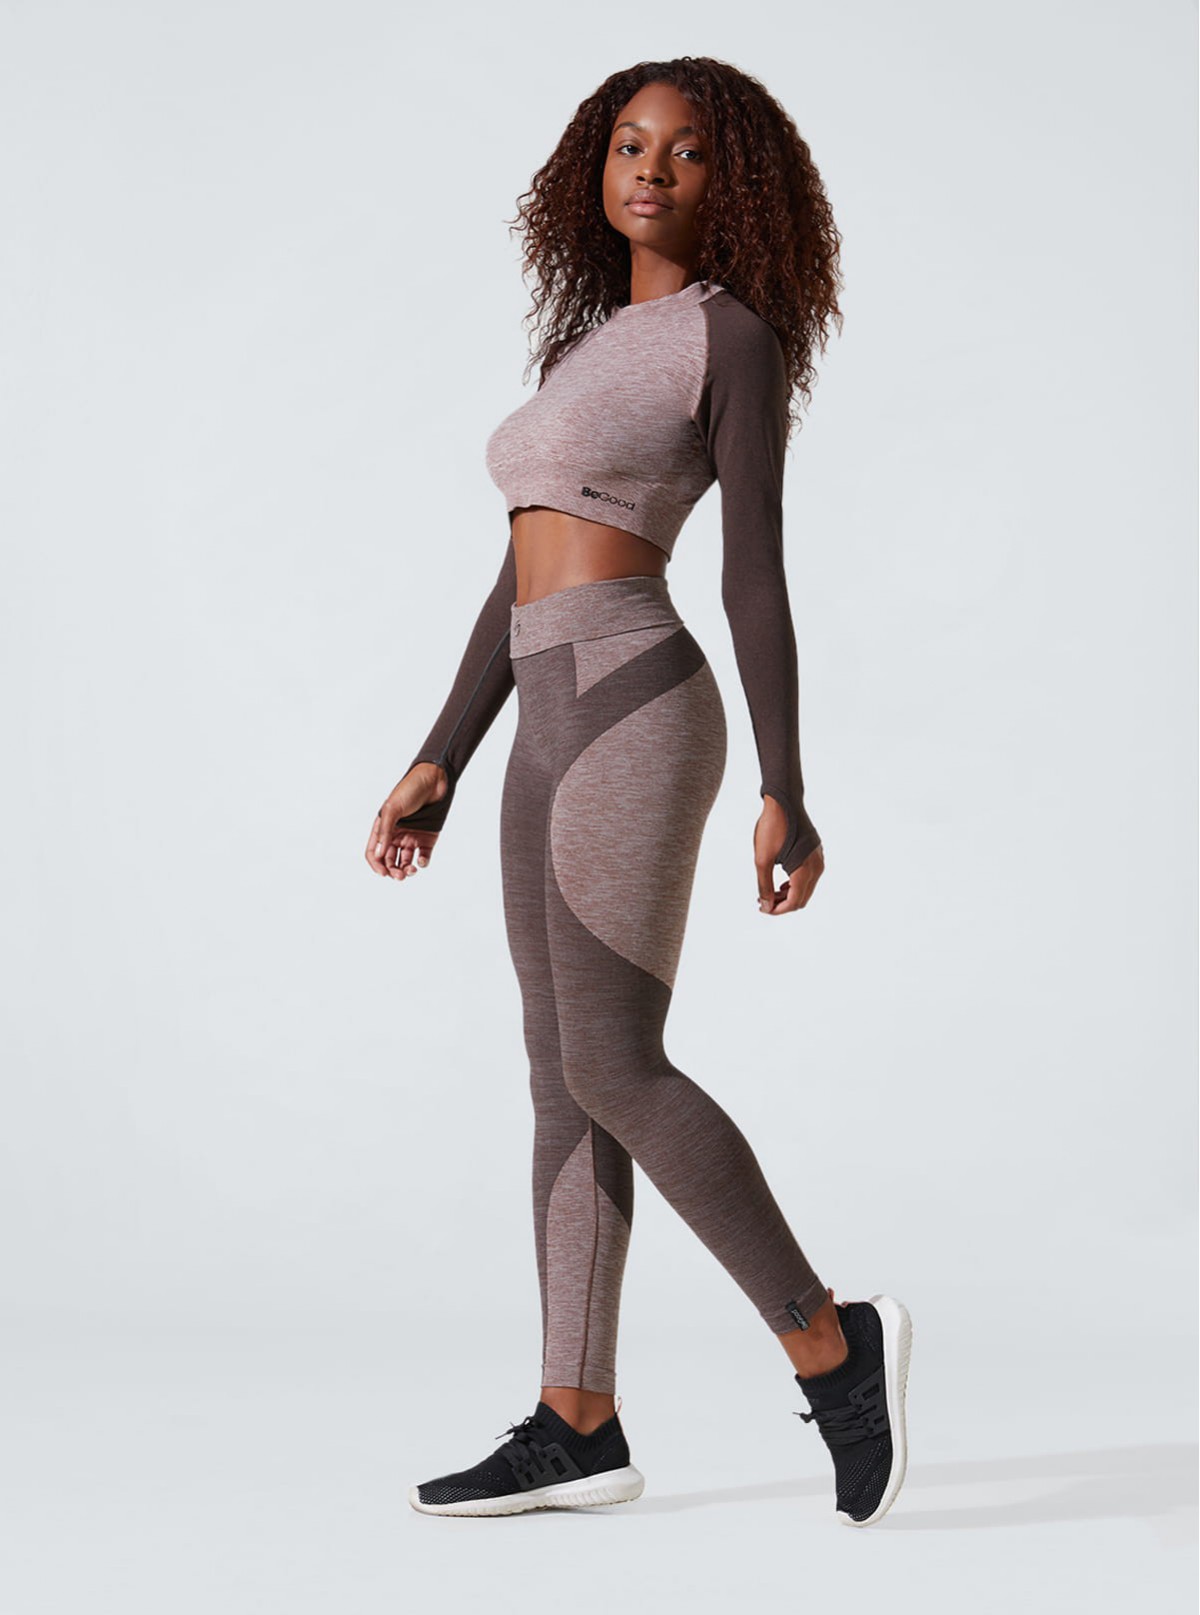 Sport slimming outfit: Long-sleeve top with draining and hydrating leggings